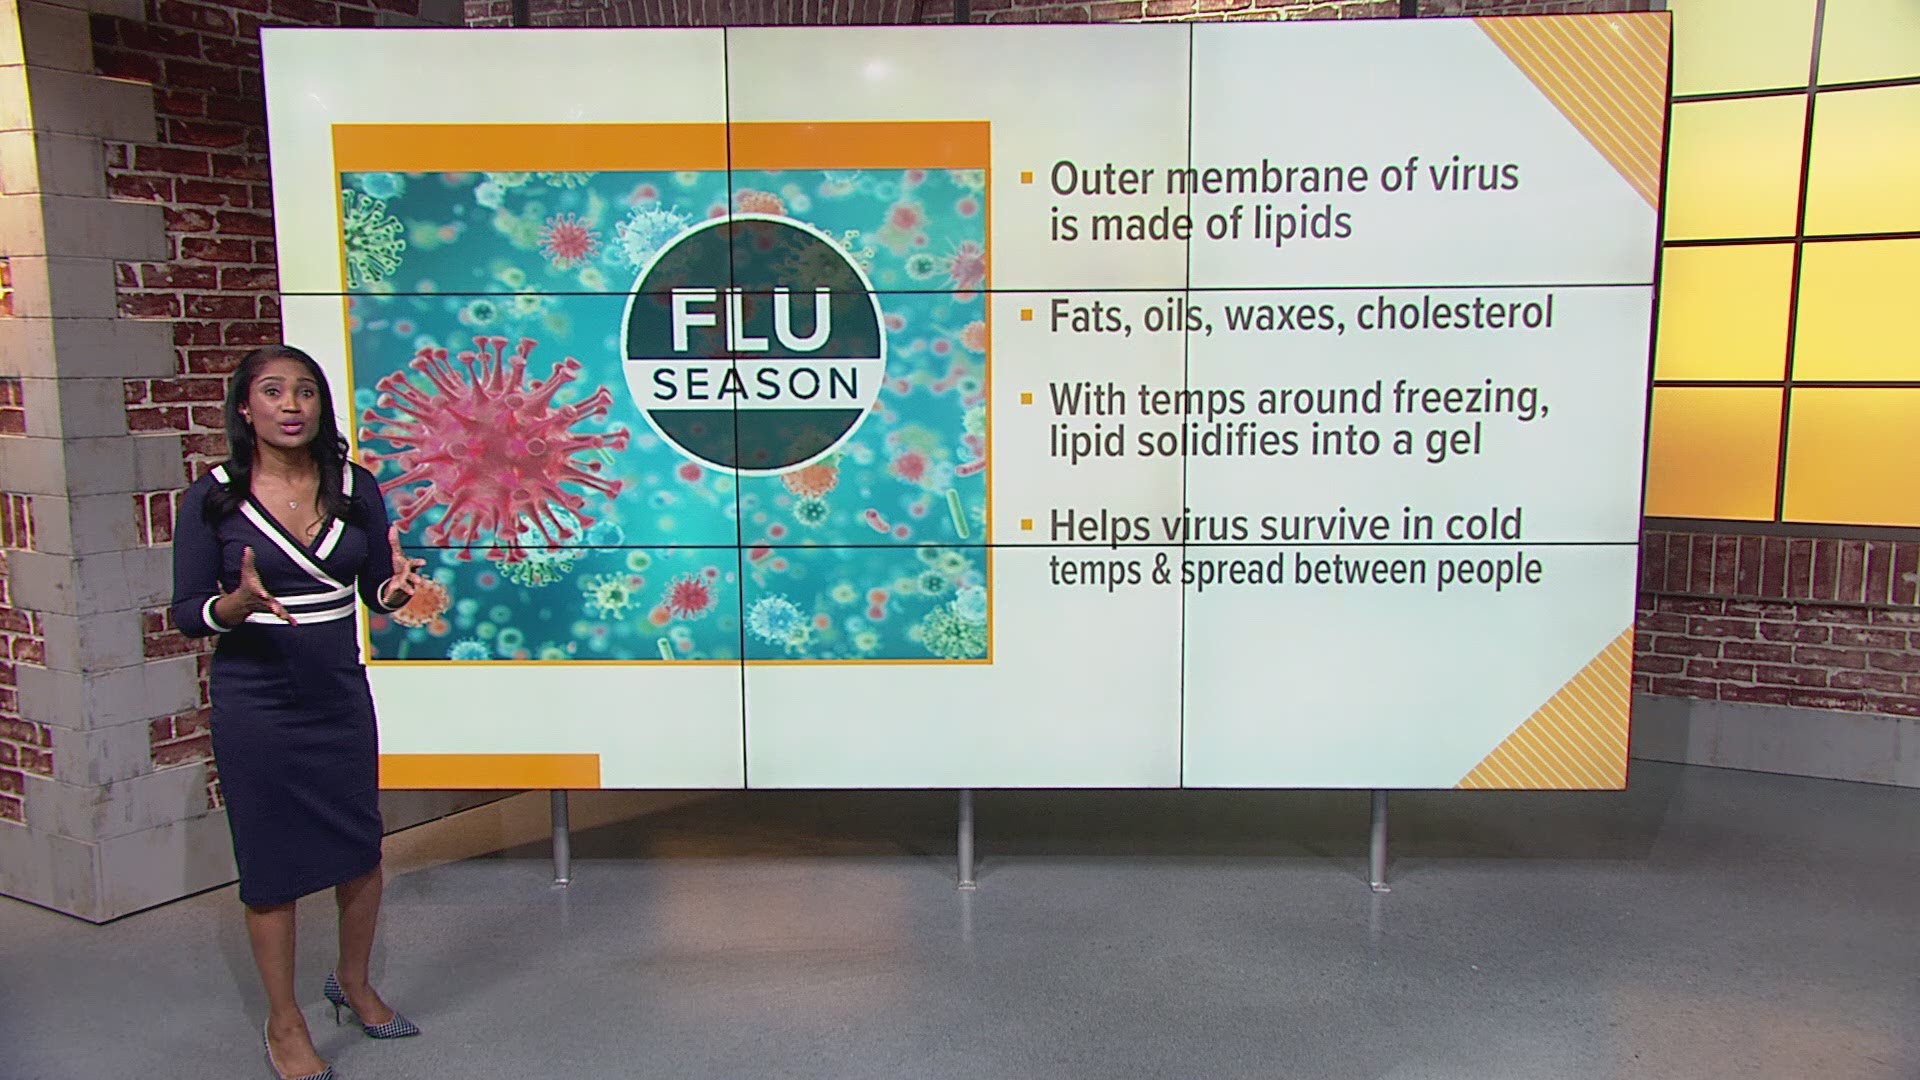 The flu virus 'likes' cold, dry weather.